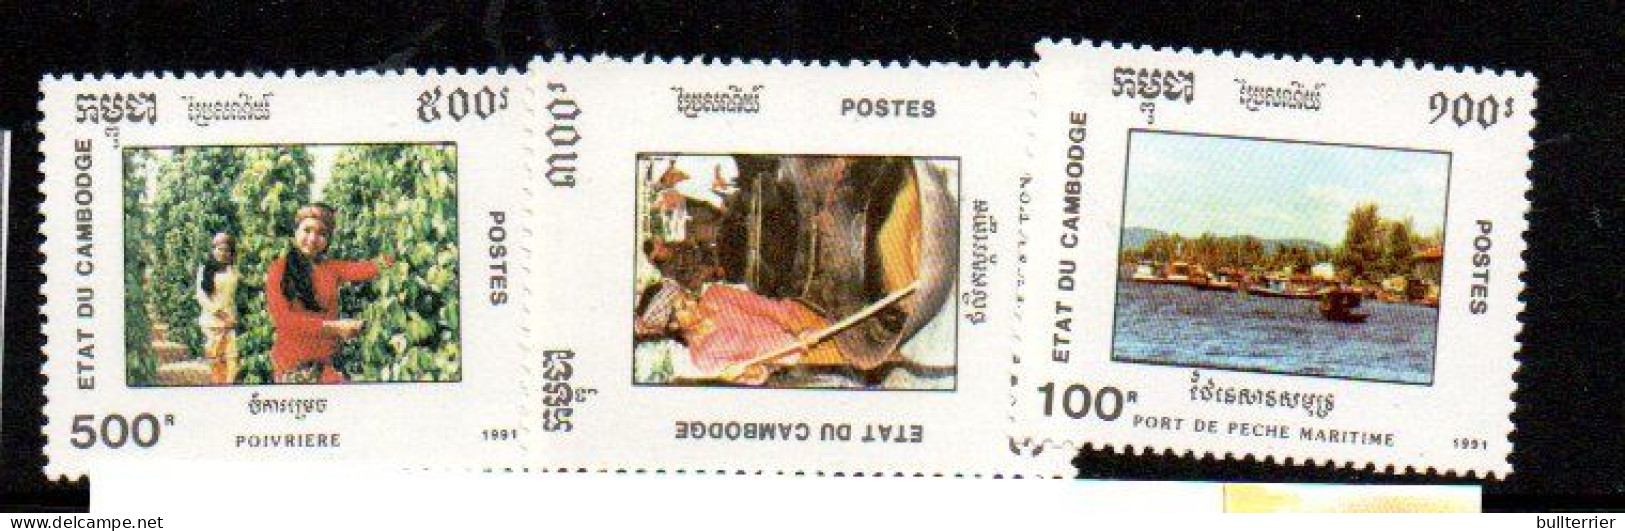 CAMBODIA - 1991 FOOD INDUSTRY SET OF 3 MINT NEVER HINGED - Cambodia